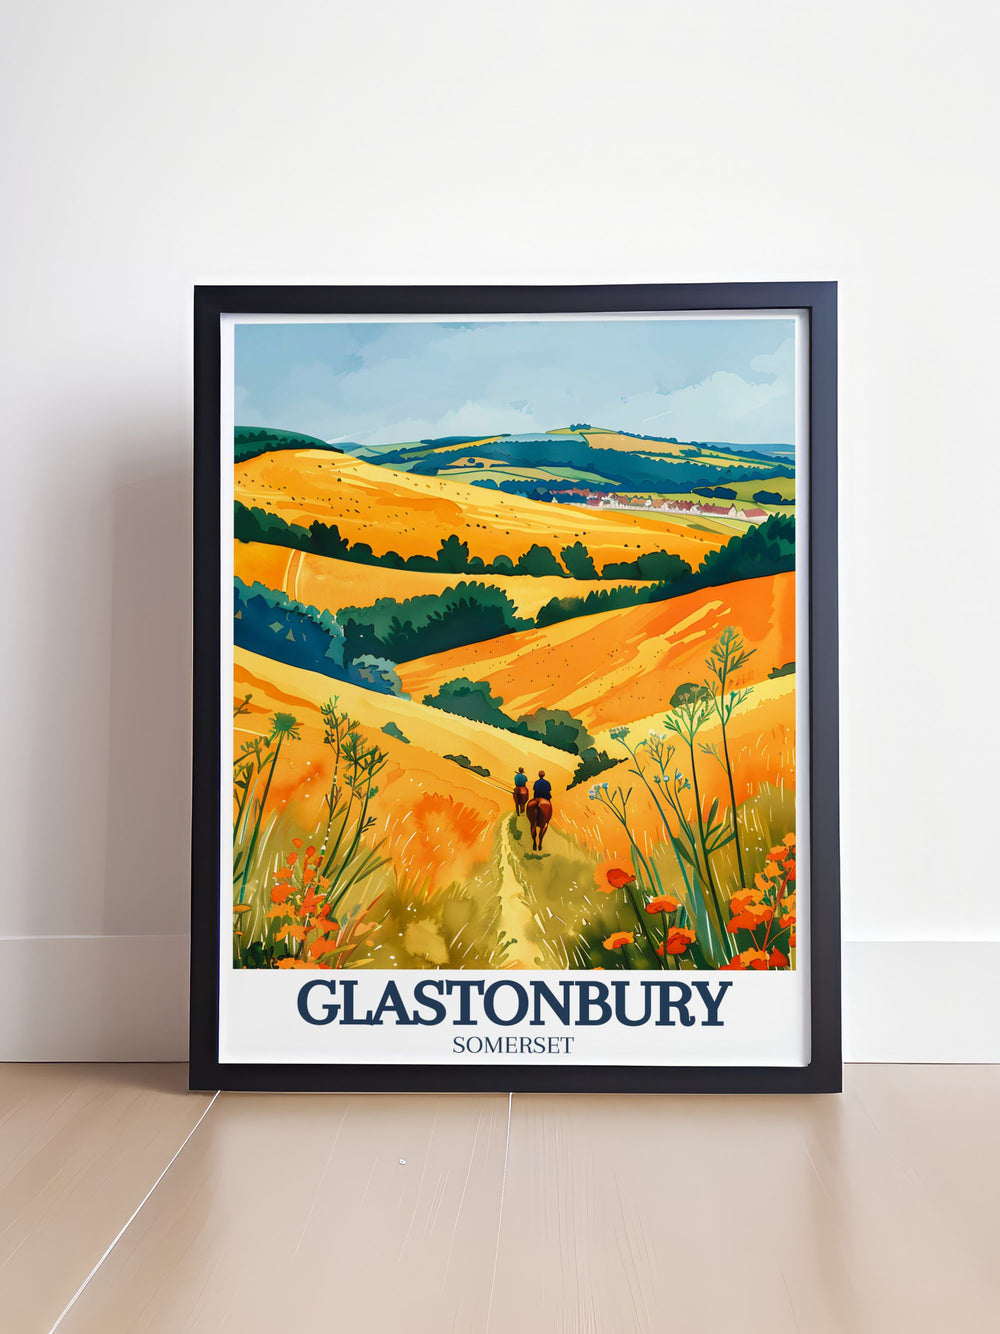 Captivating England wall art featuring the iconic Glastonbury Tor amidst the serene Somerset levels and Mendip hills perfect for those seeking UK art and Glastonbury decor a wonderful choice for England travel gifts and home decoration.